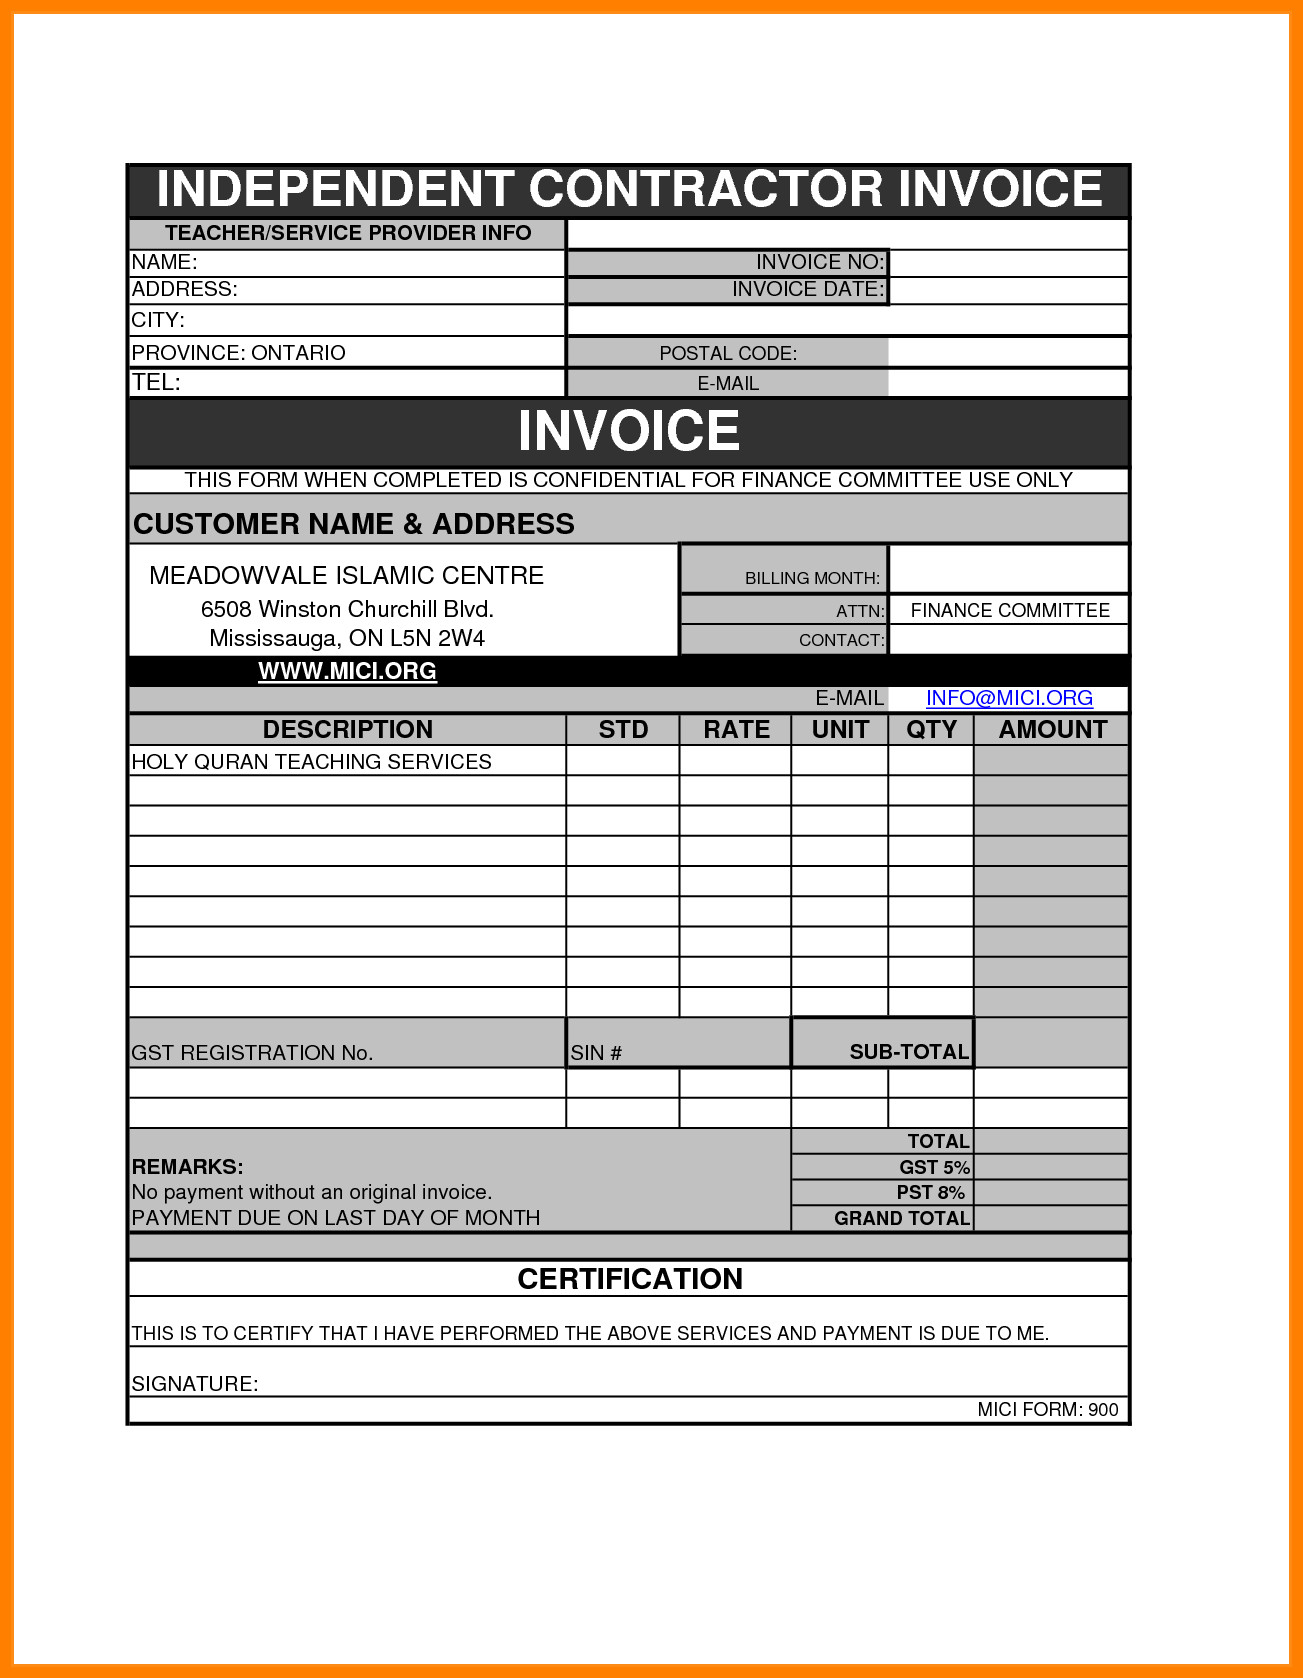 Independent Contractor Invoice Template 7 Independent Contractor Invoice